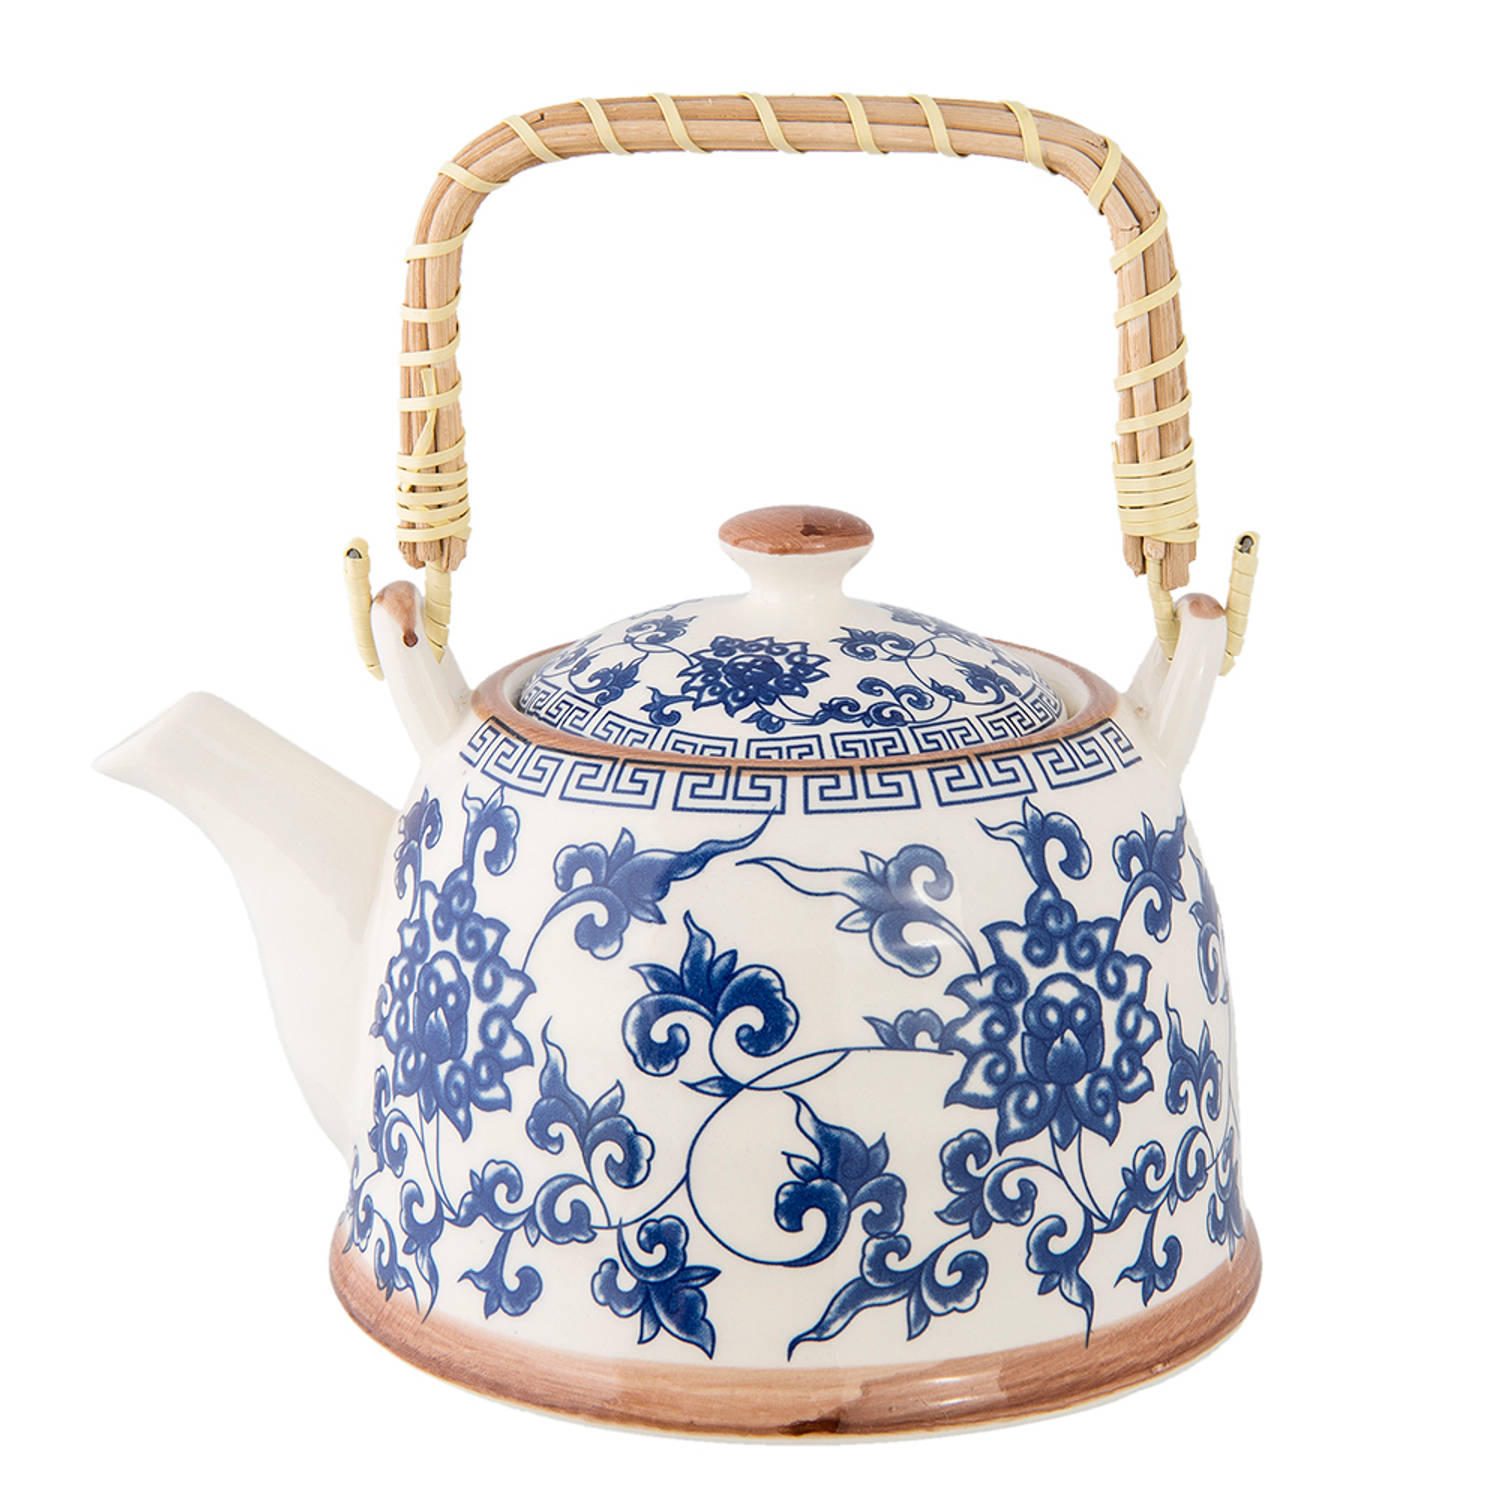 HAES DECO - Chinese Theepot - Porselein - Chinese Bloemen - Theepot 700 ml - Traditioneel Theeservies, Theekan